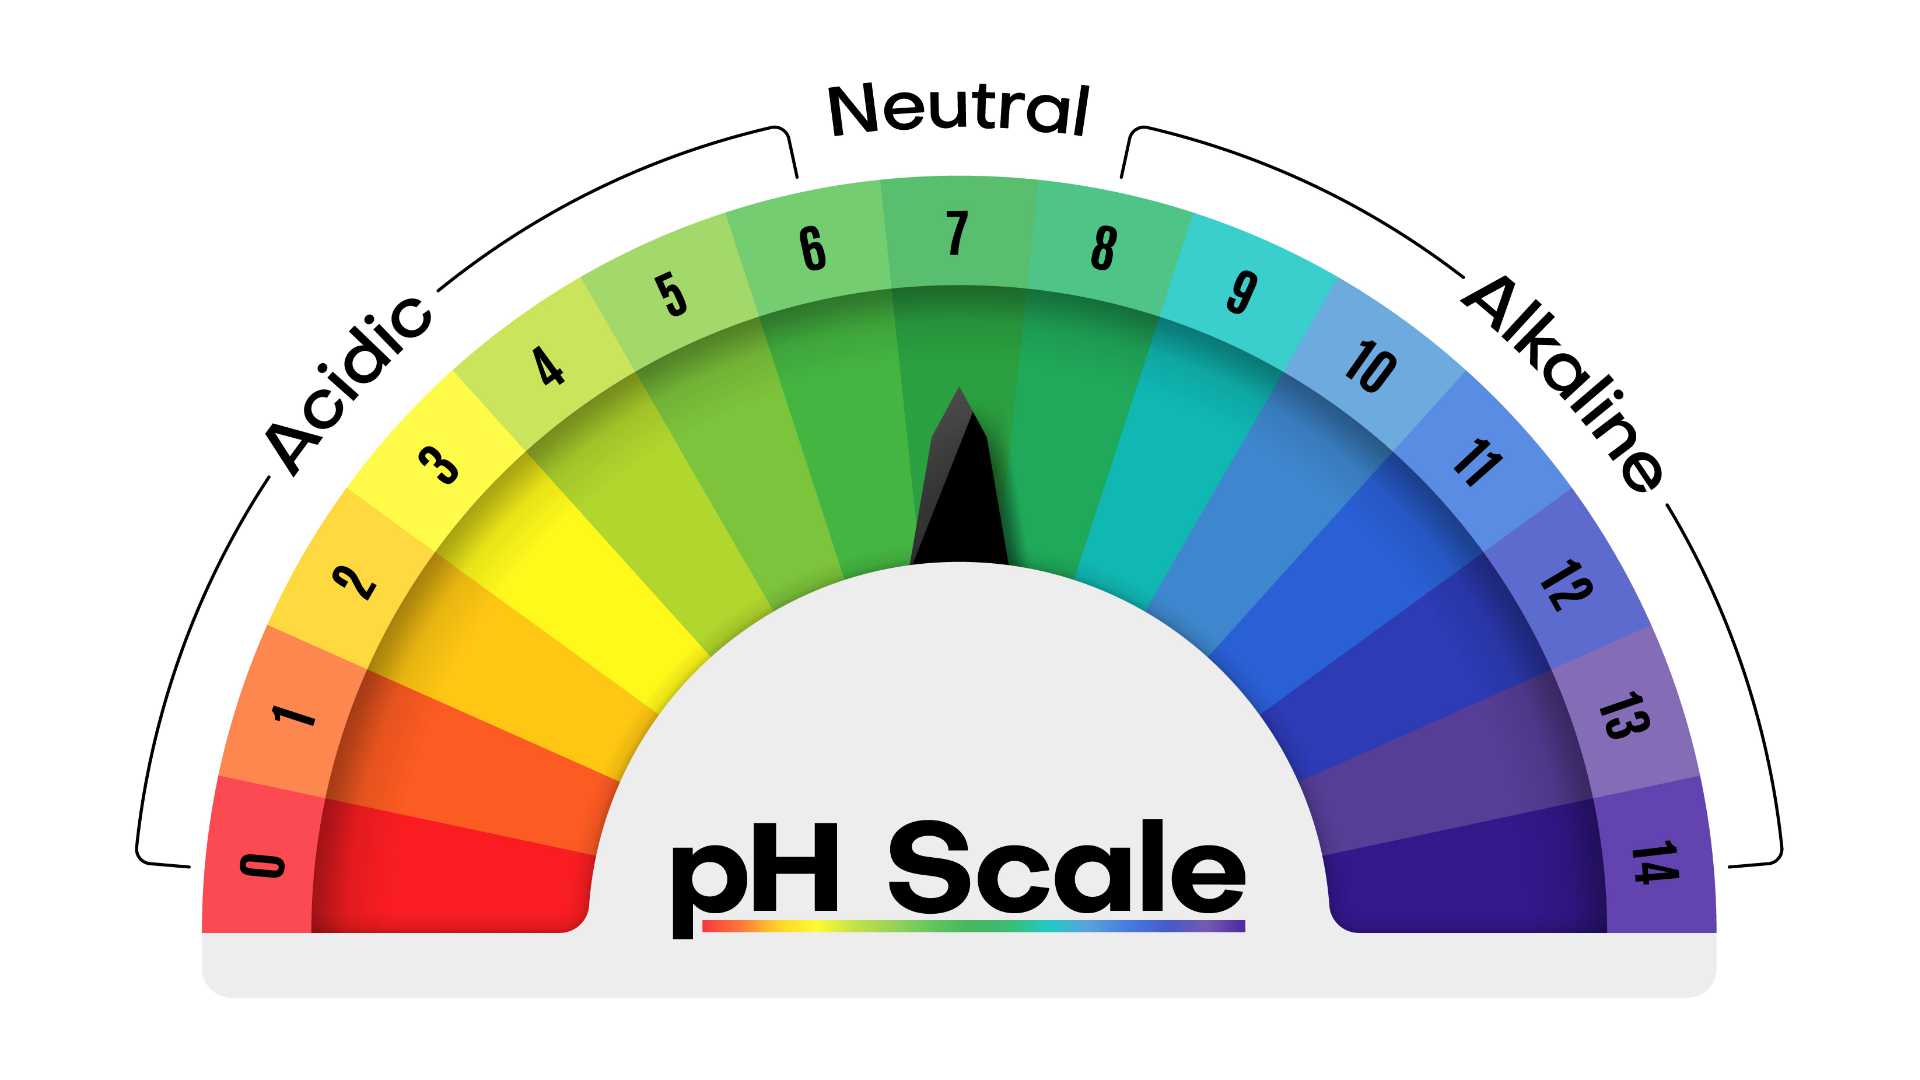 pH scale showing acidosis